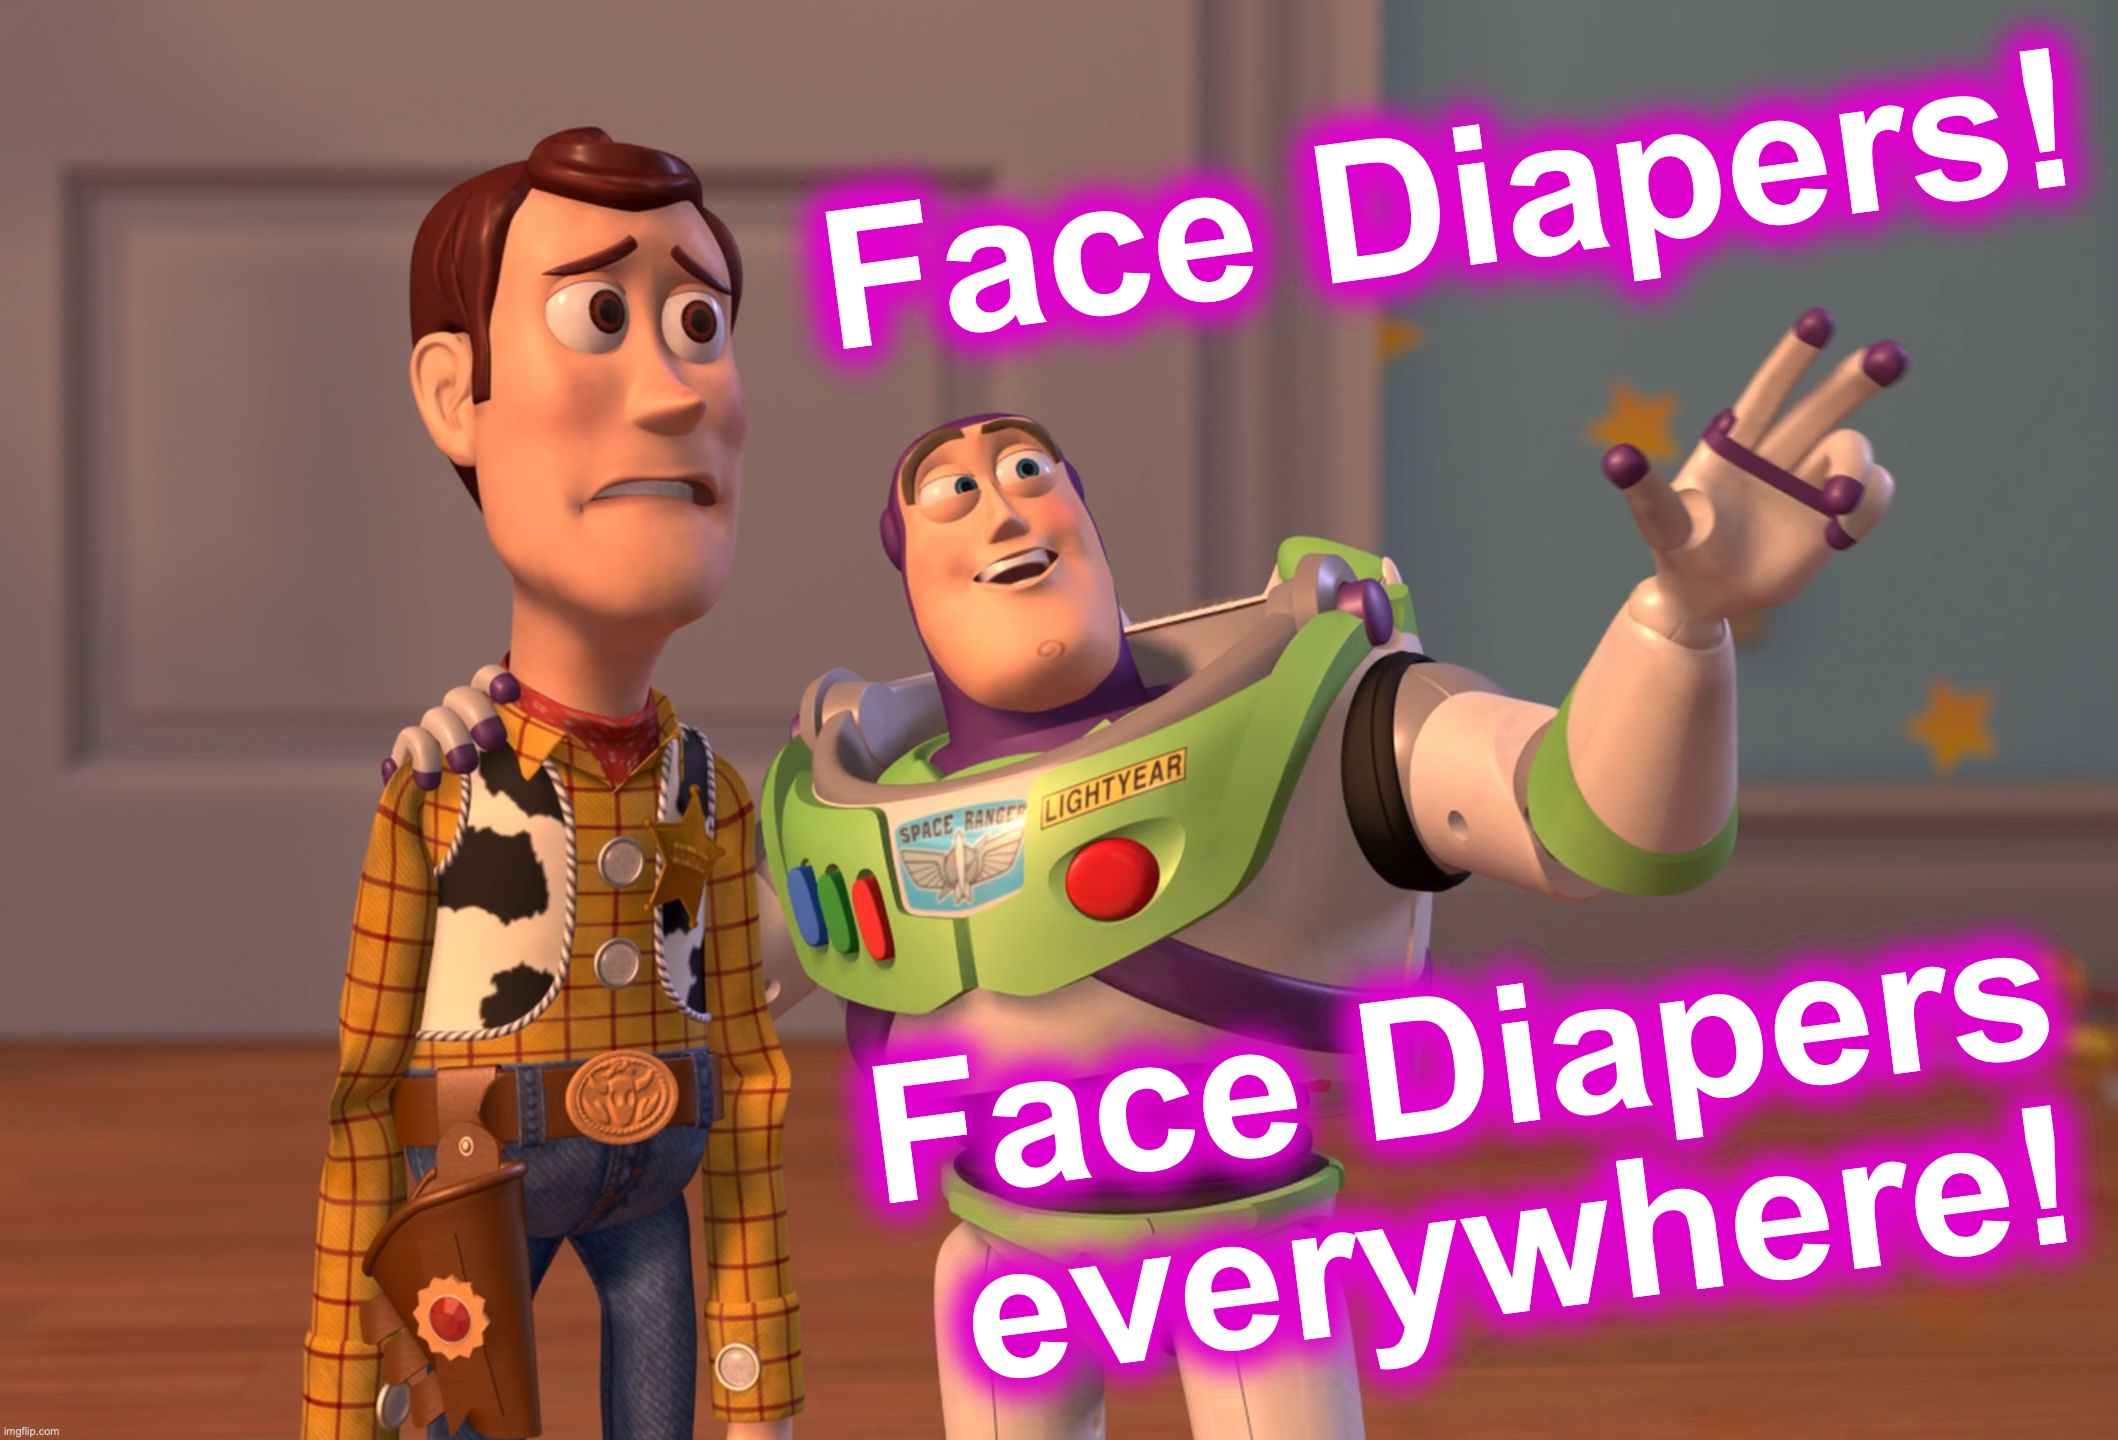 X, X Everywhere Meme | Face Diapers! Face Diapers everywhere! | image tagged in x x everywhere,diapers,face,masks | made w/ Imgflip meme maker